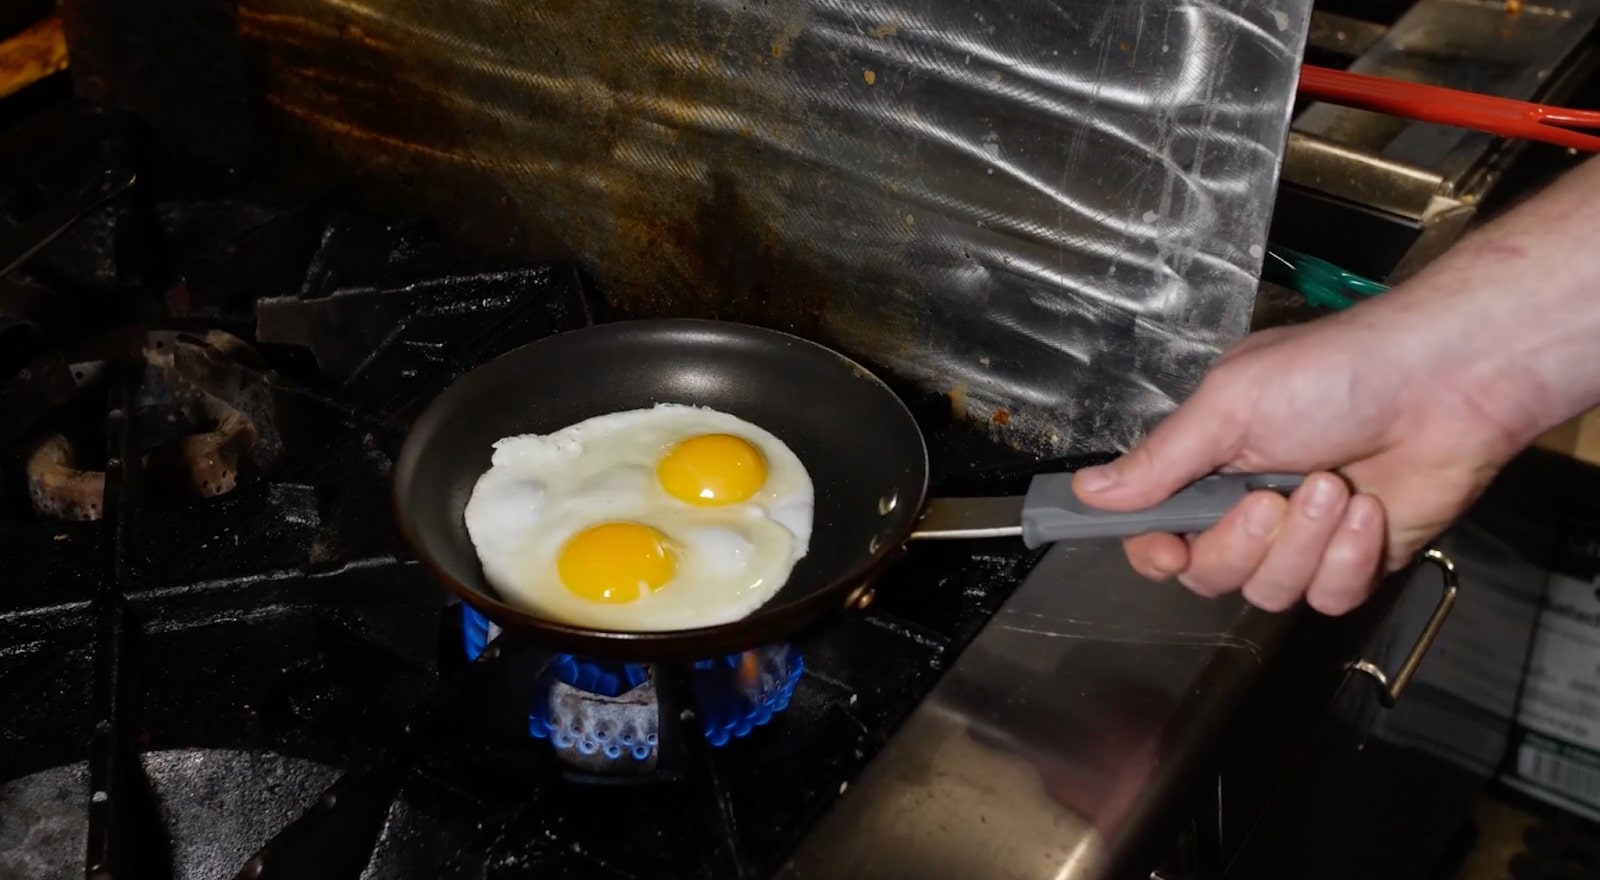 Two fried eggs sit in a small pan. The pan rests on a burner with a small flame blazing